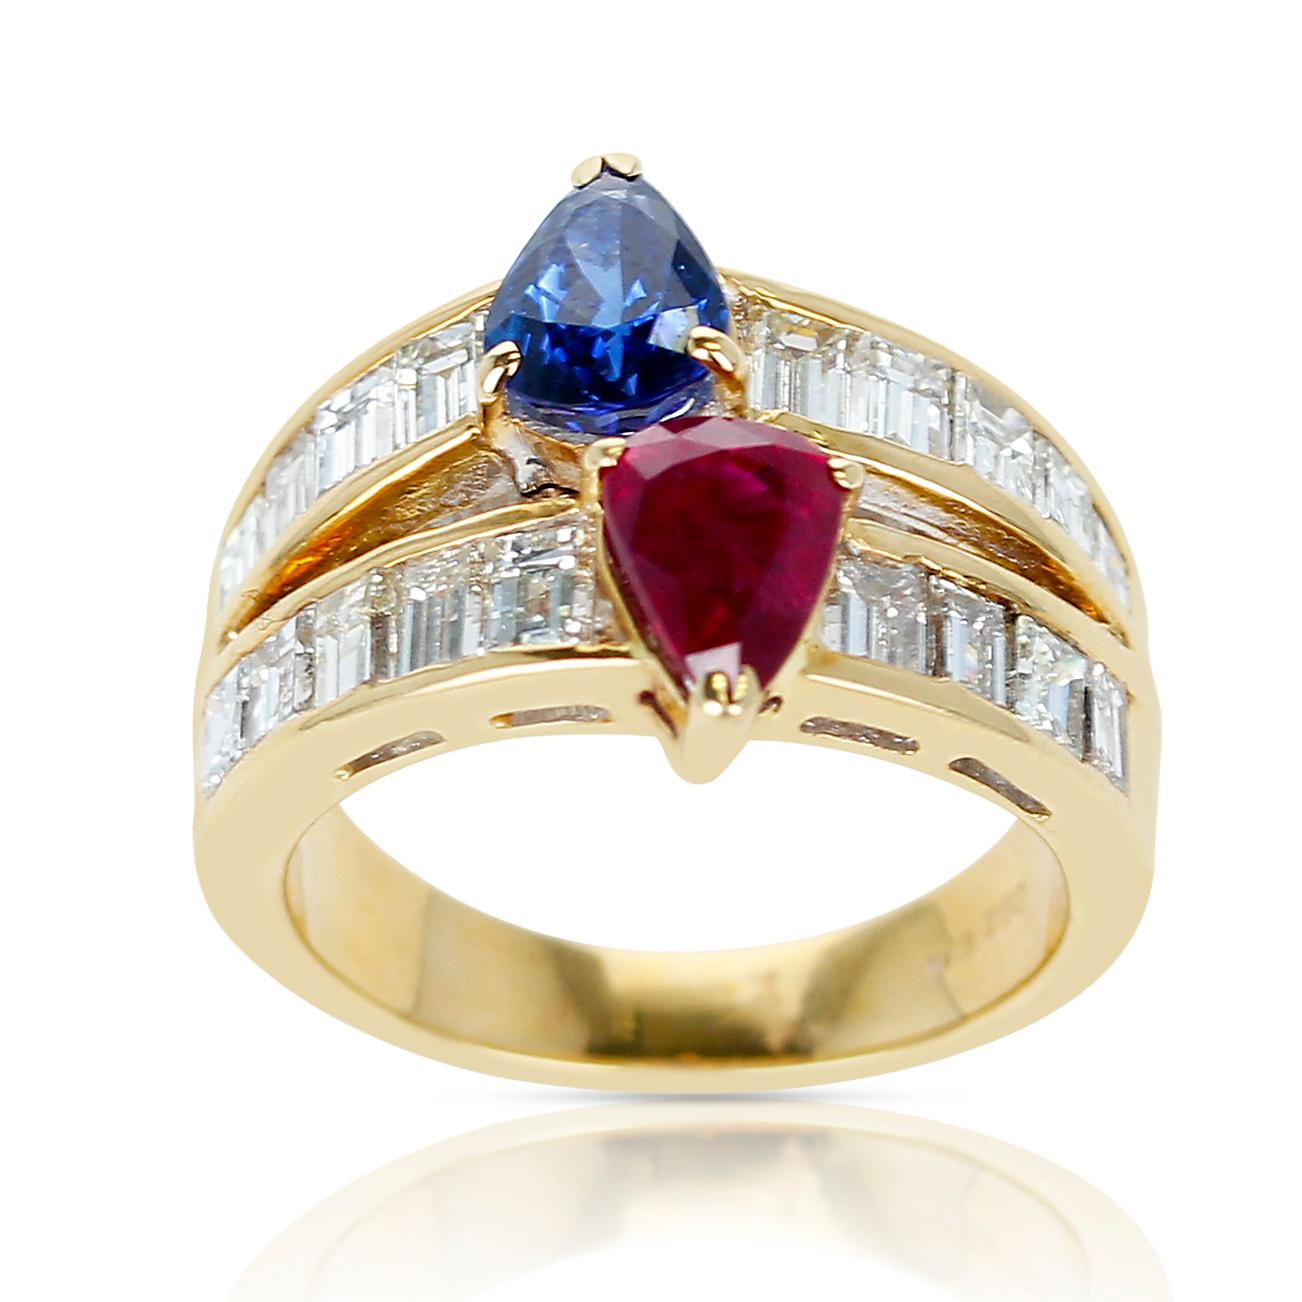 A Pear Shape Sapphire and Ruby Ring with Emerald-Cut Diamonds made in 18k Yellow Gold. The Ruby weighs appx. 1.04 carats, the sapphire weighs appx. 1.17 carats, and the diamonds weigh 2.15 carats. The total weight of the ring is 8 grams. Ring Size